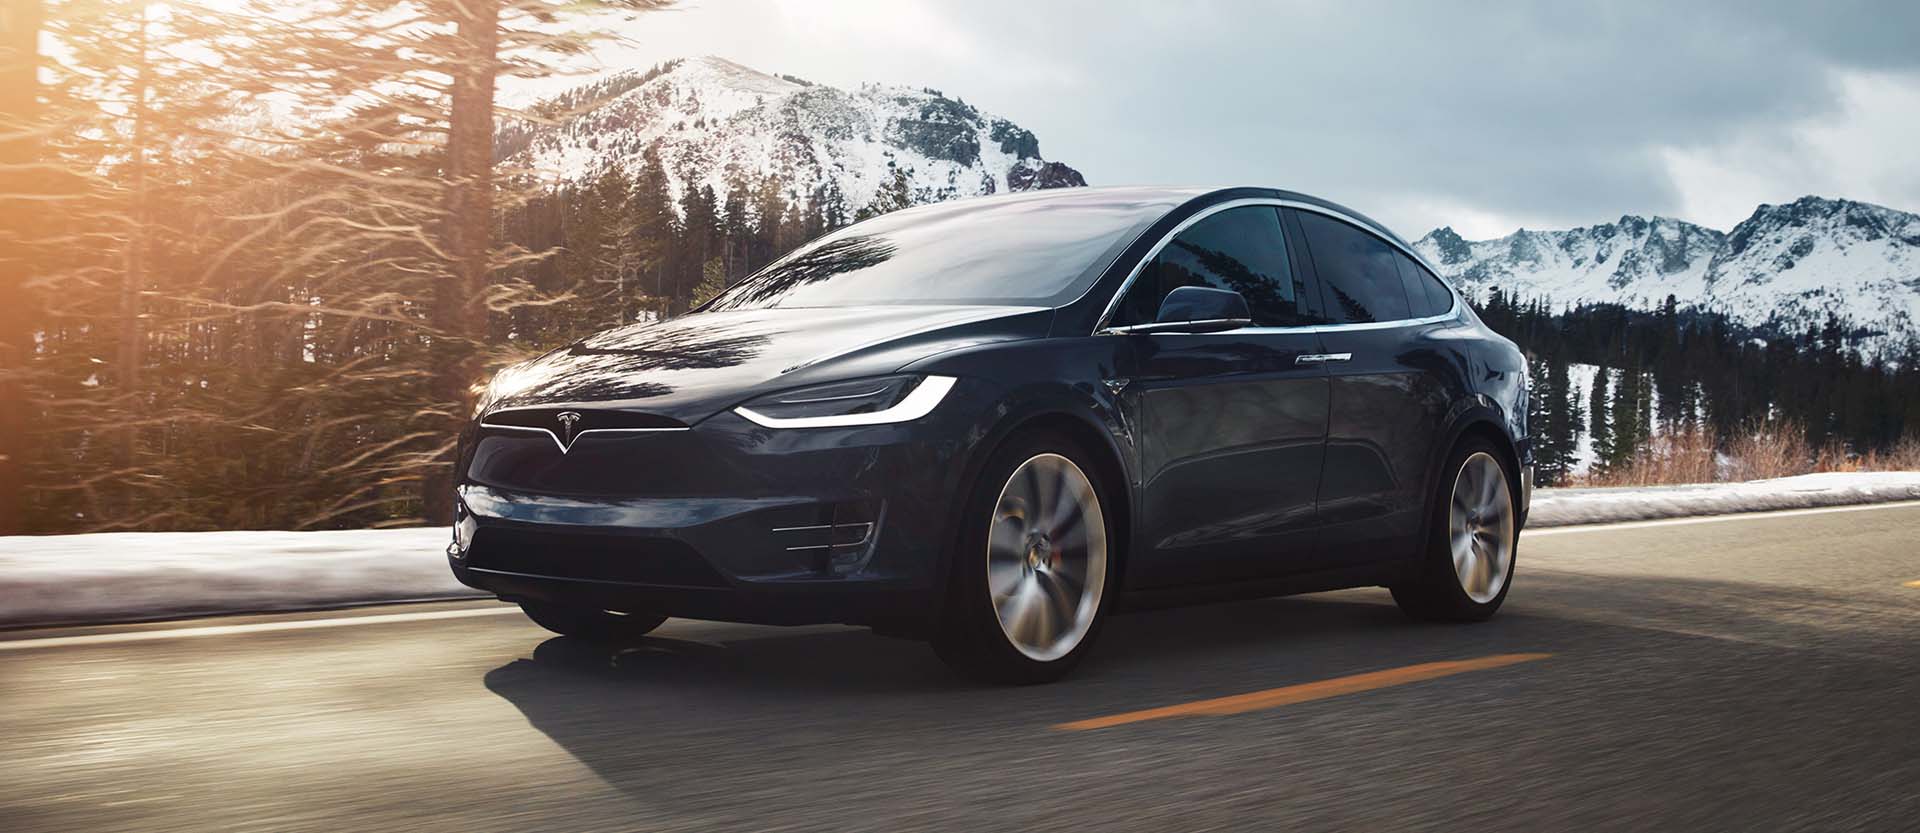 Tesla Model X Gets Uniform 5 Star Safety Ratings From Nhtsa